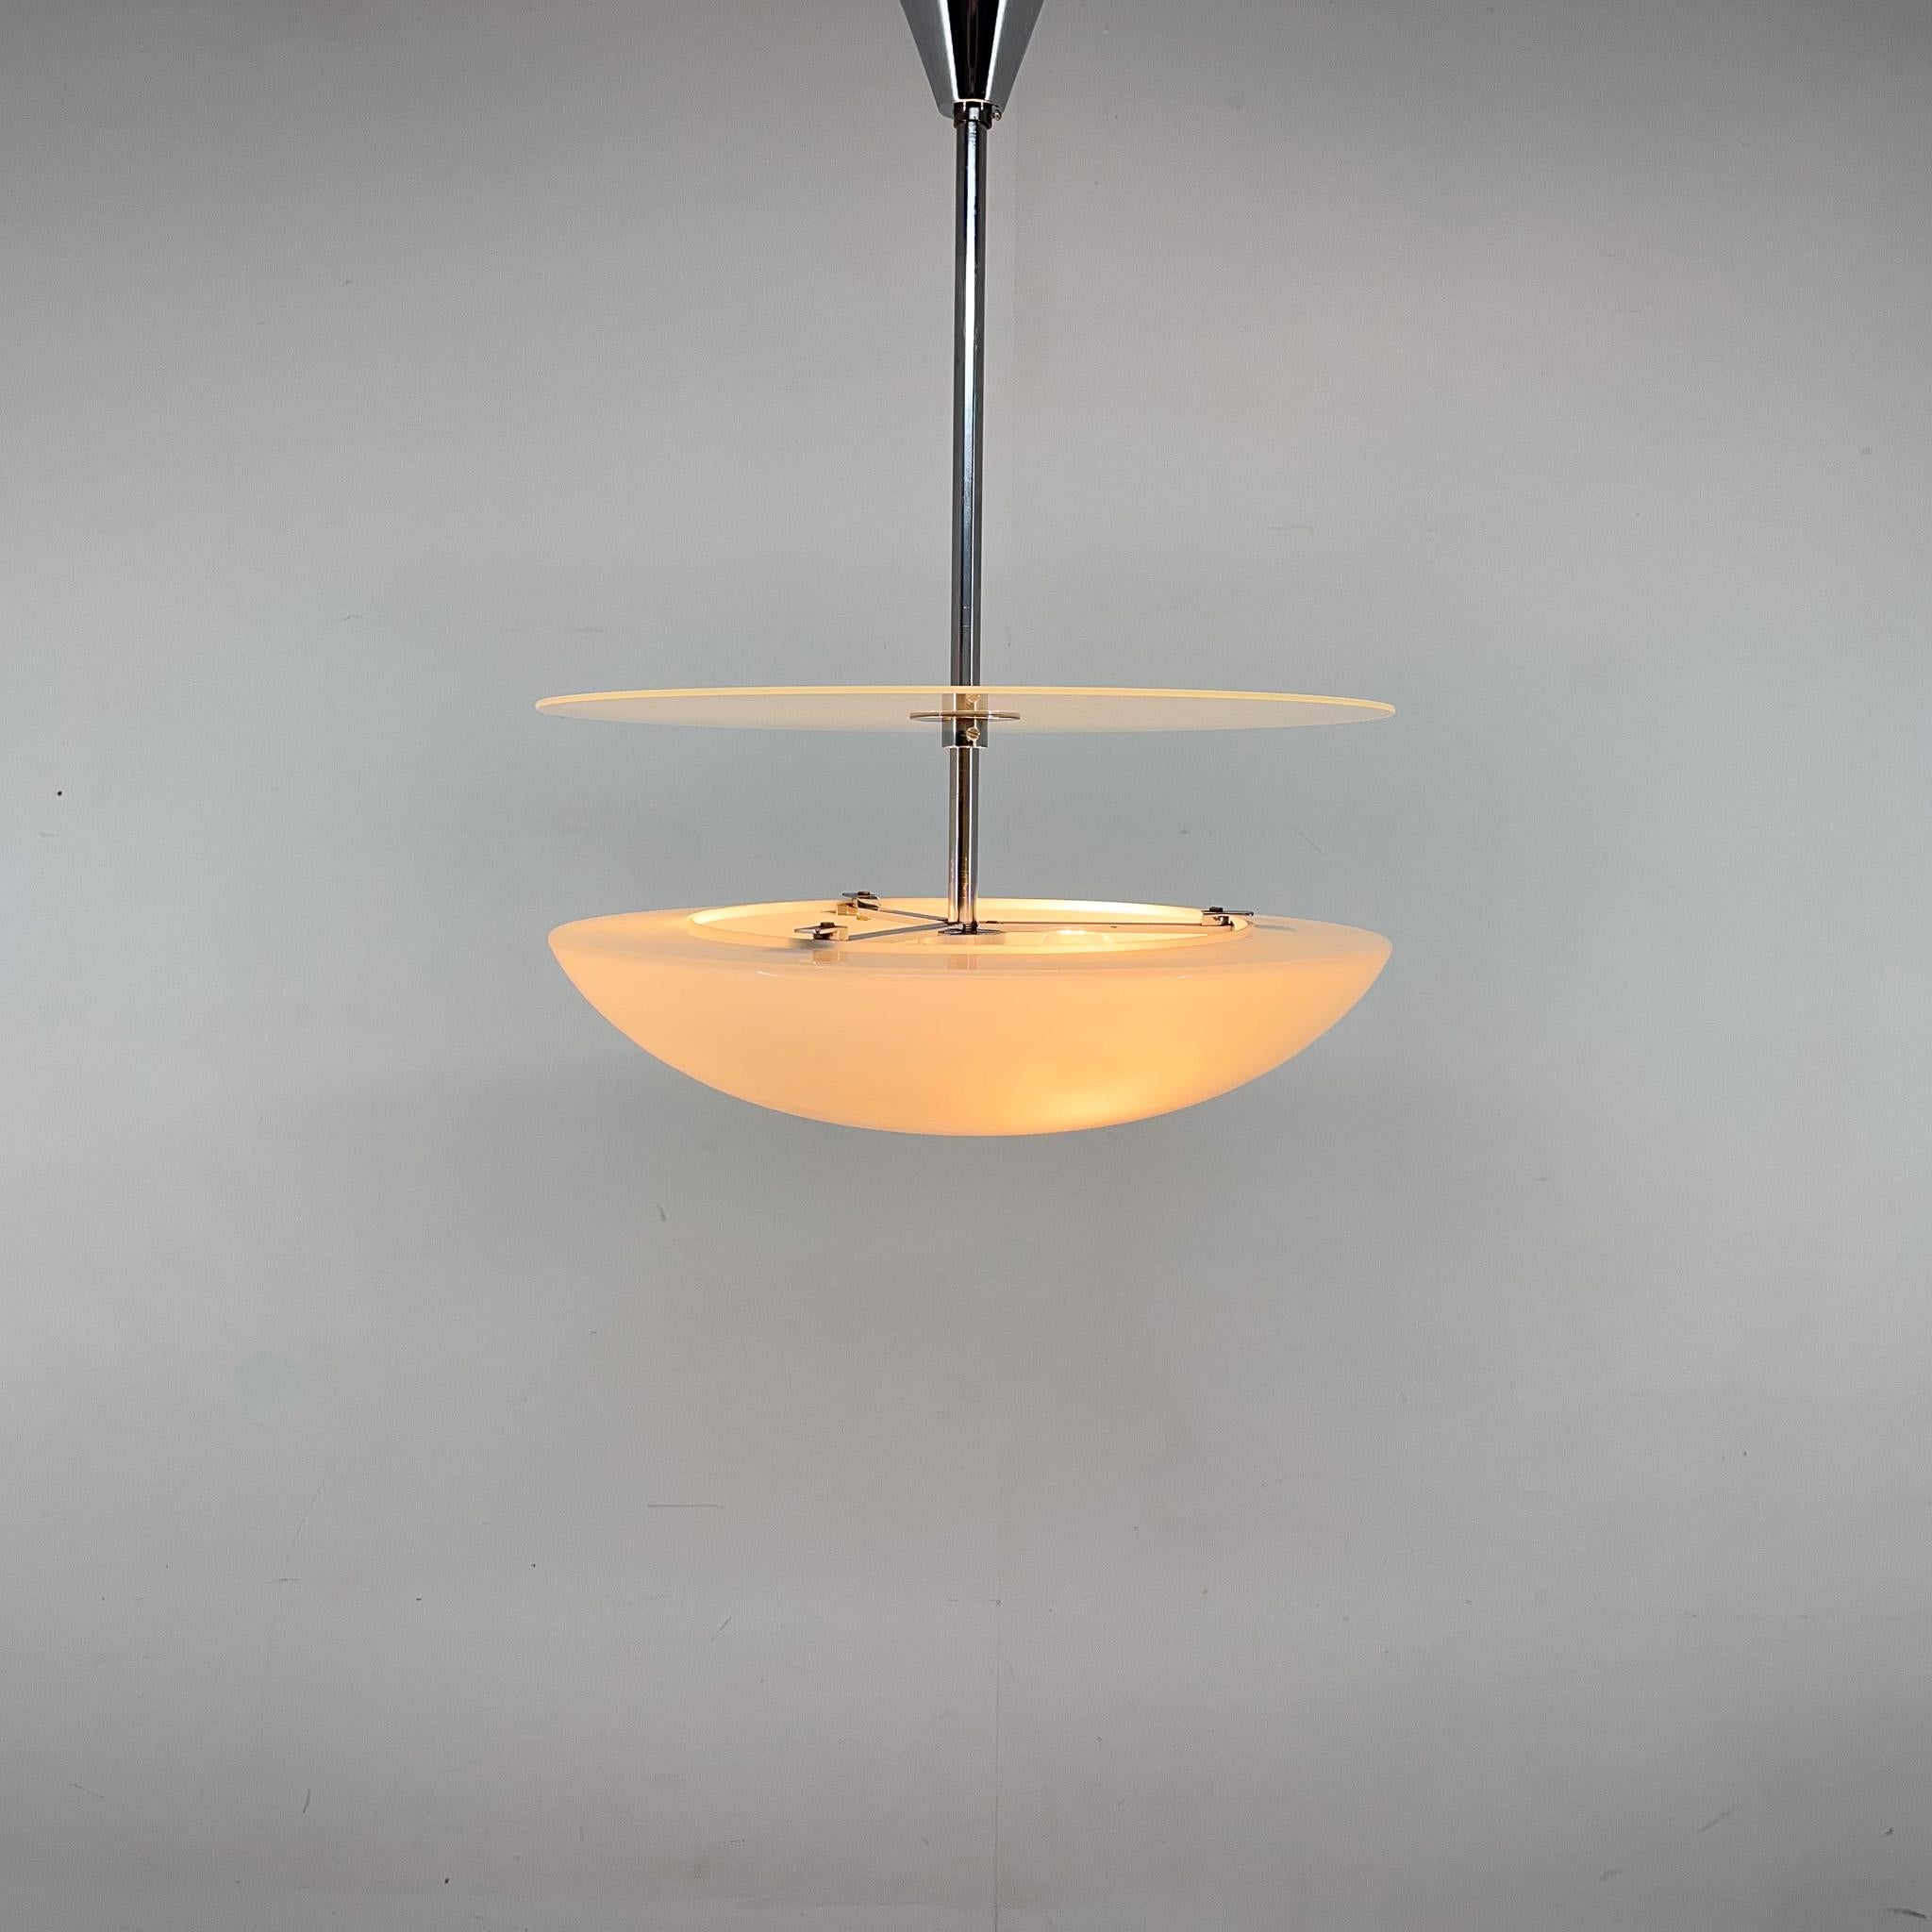 Functionalist/Bauhaus Chrome &Glass Chandelier In Good Condition For Sale In Praha, CZ